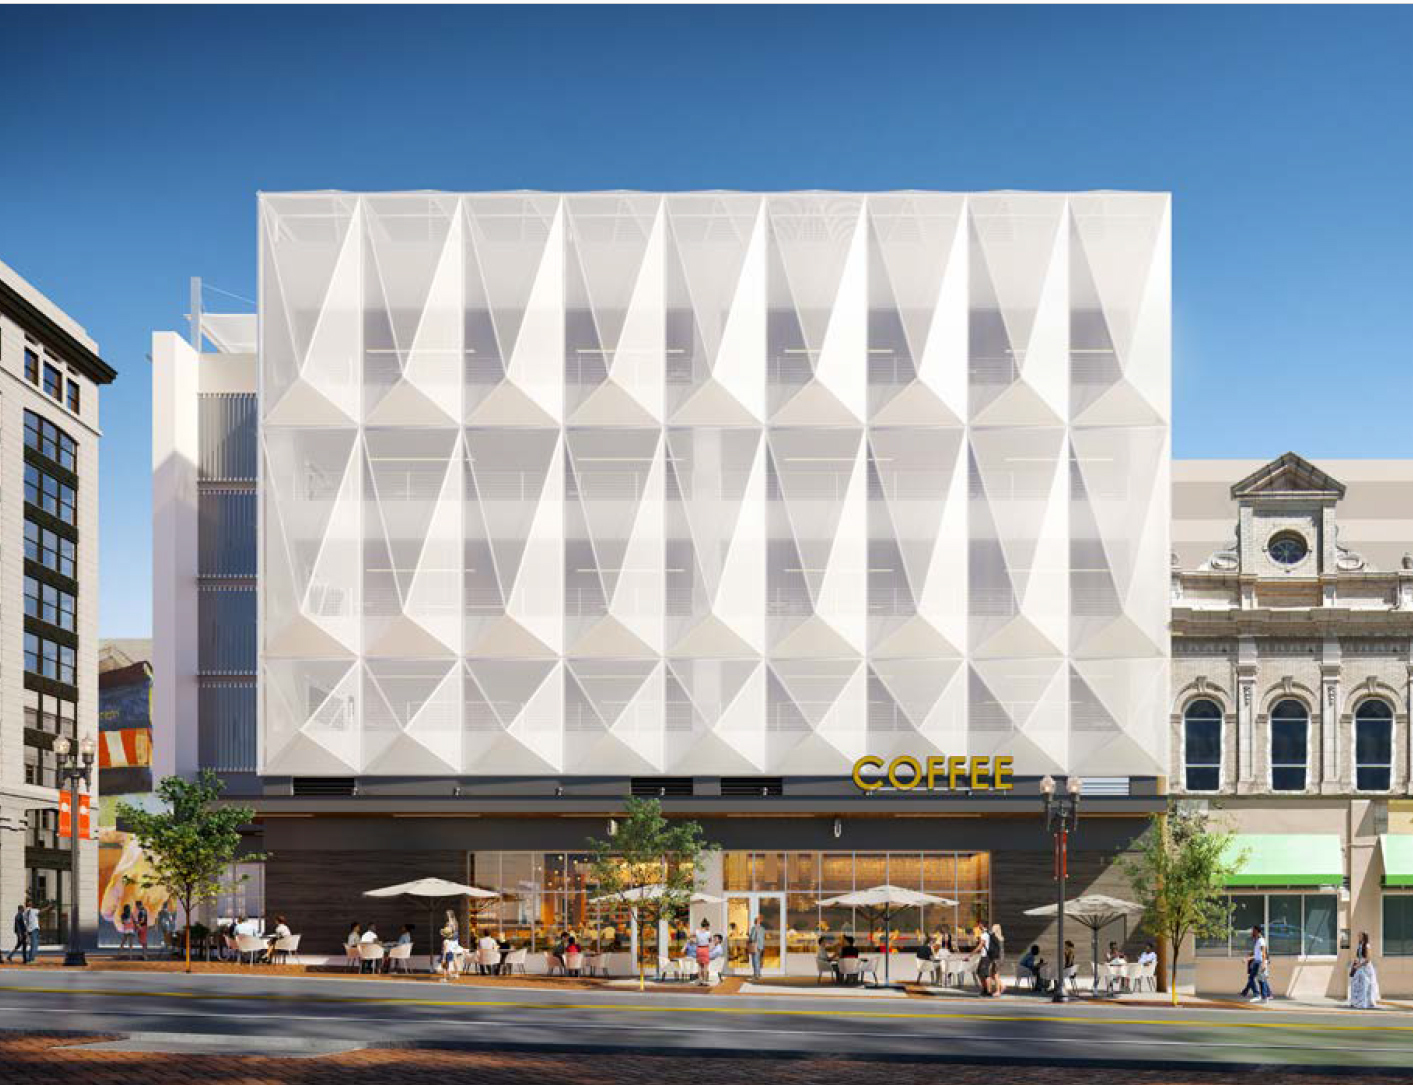 The white fabric mesh cladding on the proposed VyStar parking garage.